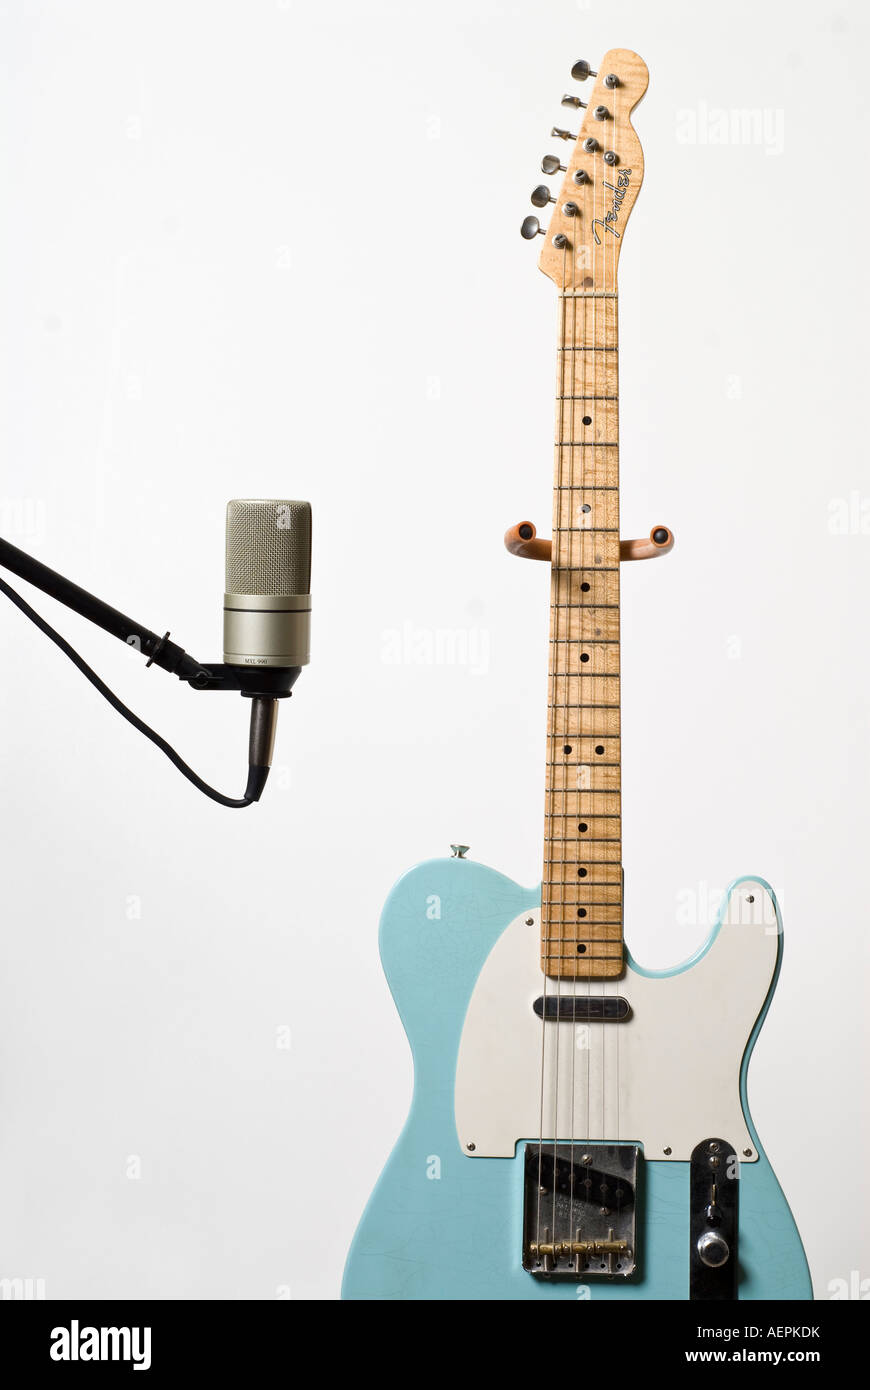 Fender Telecaster electric guitar and microphone Stock Photo